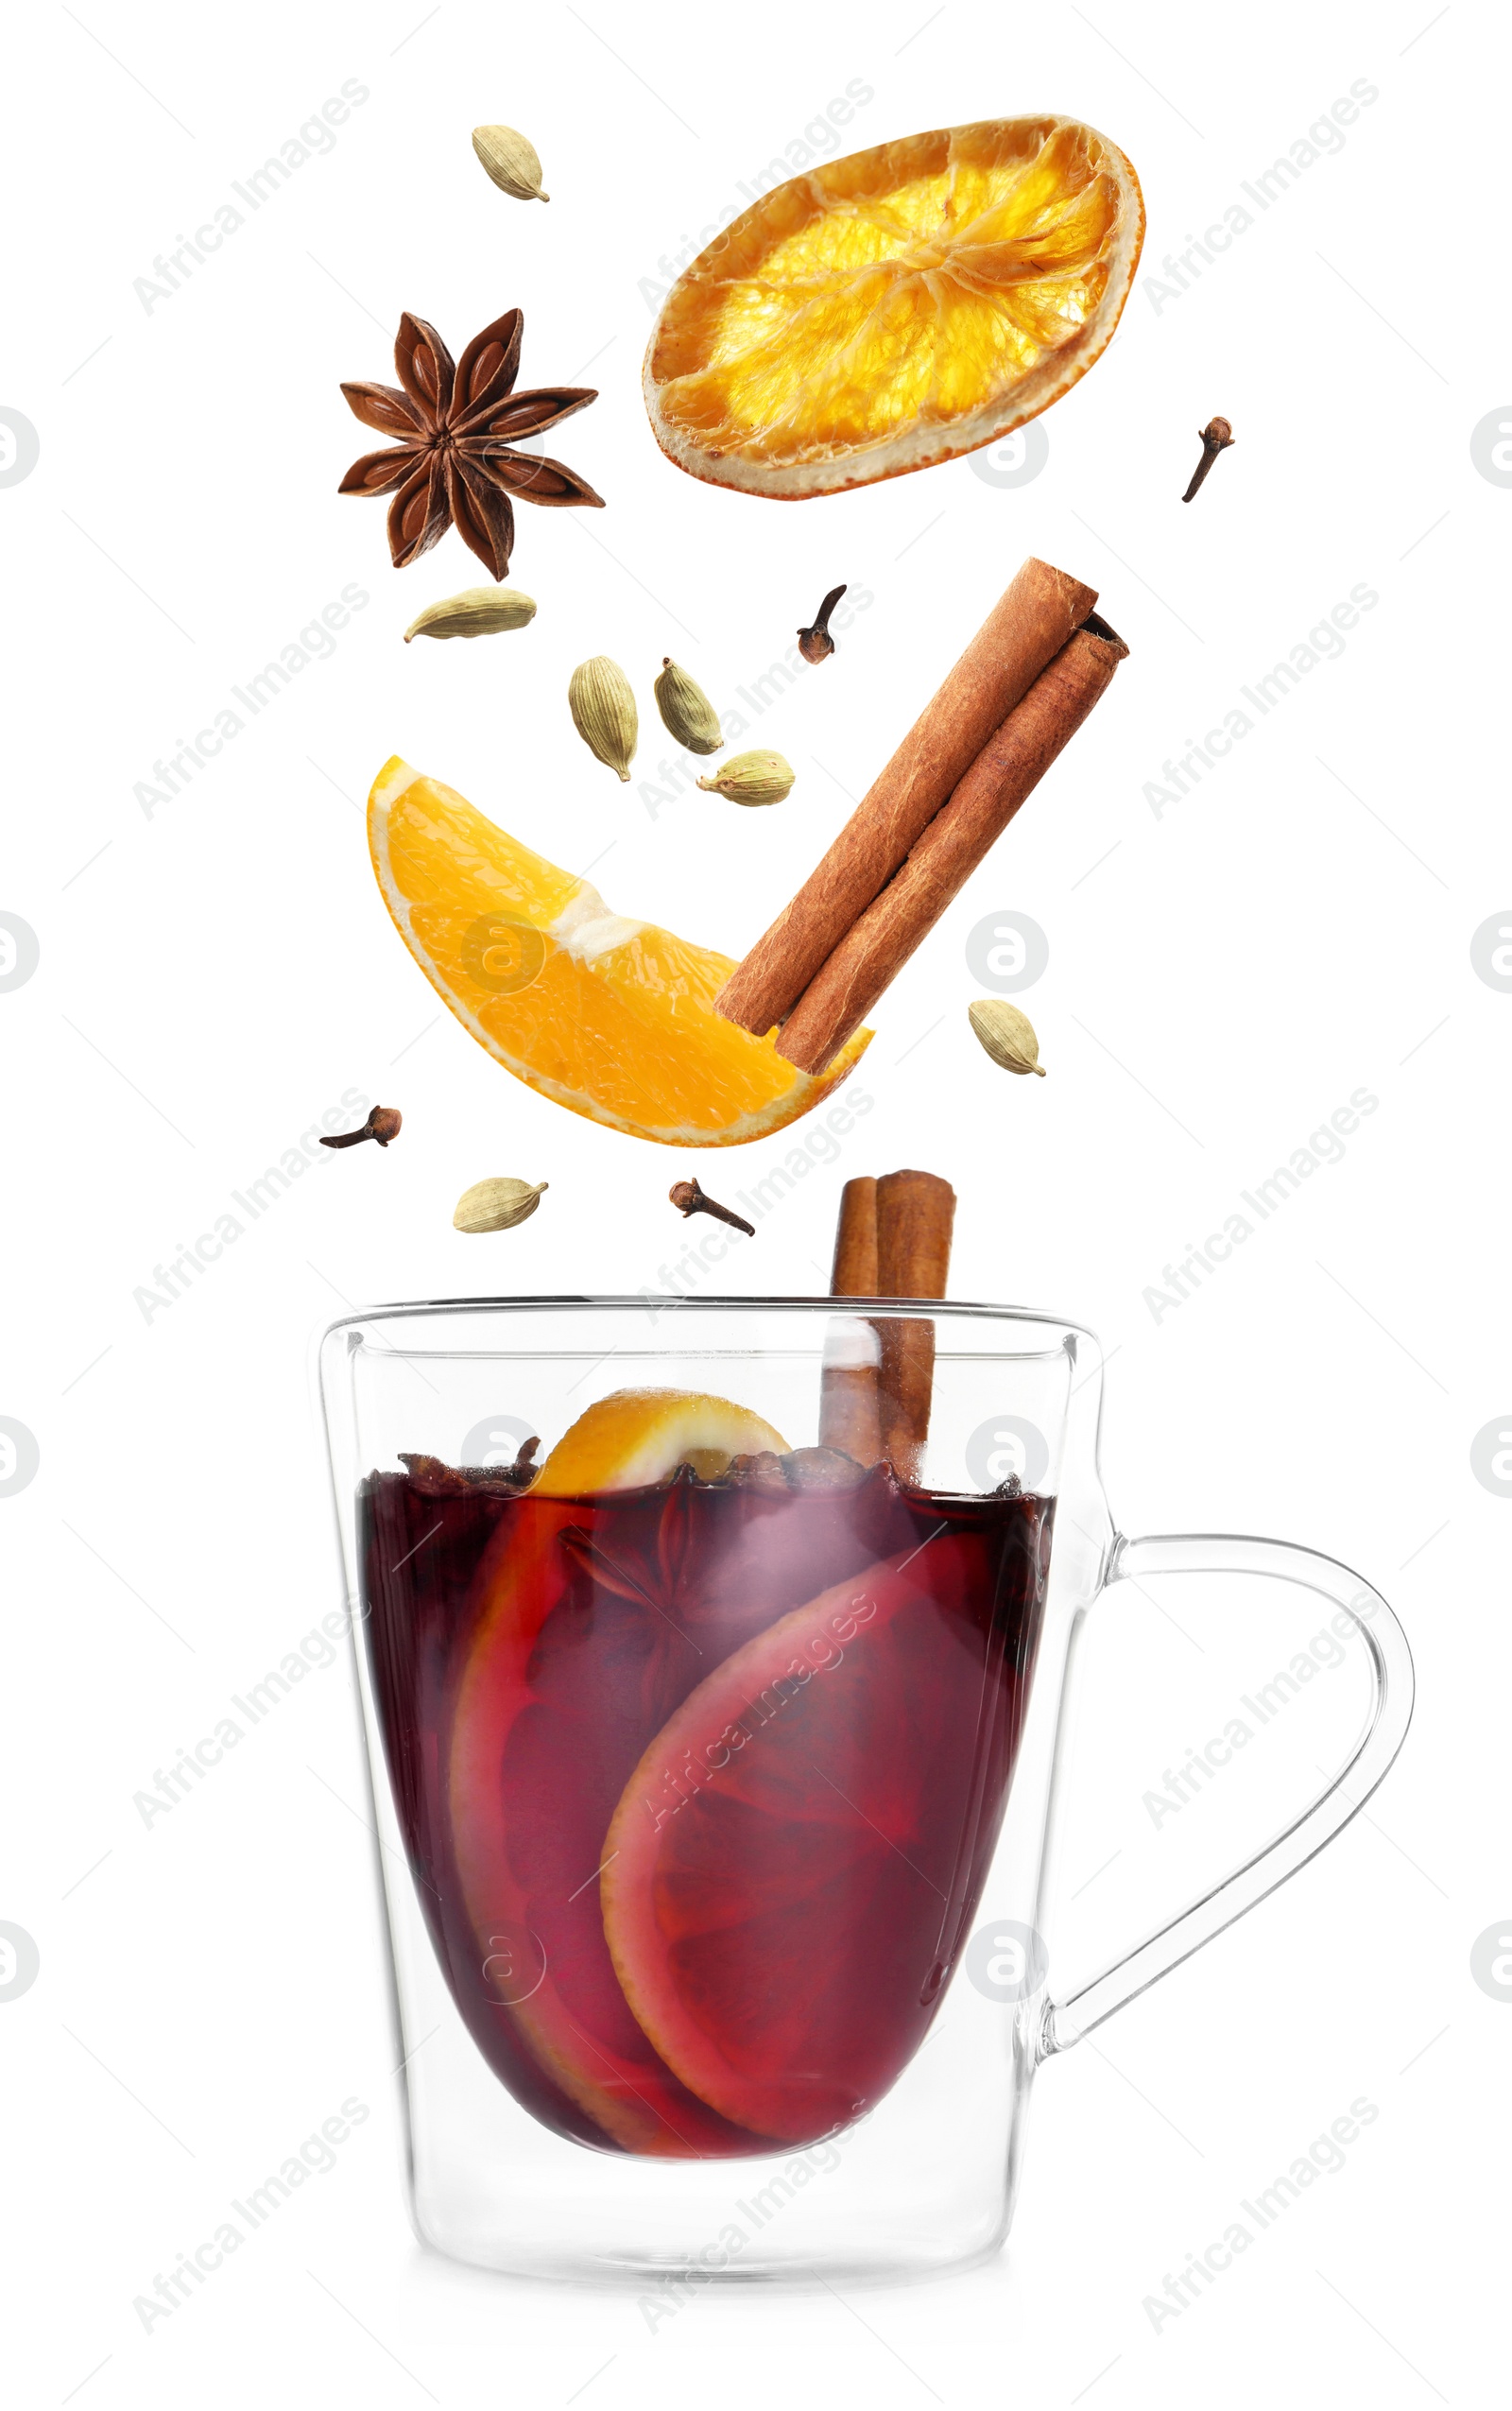 Image of Cut orange and different spices falling into glass cup of mulled wine on white background 